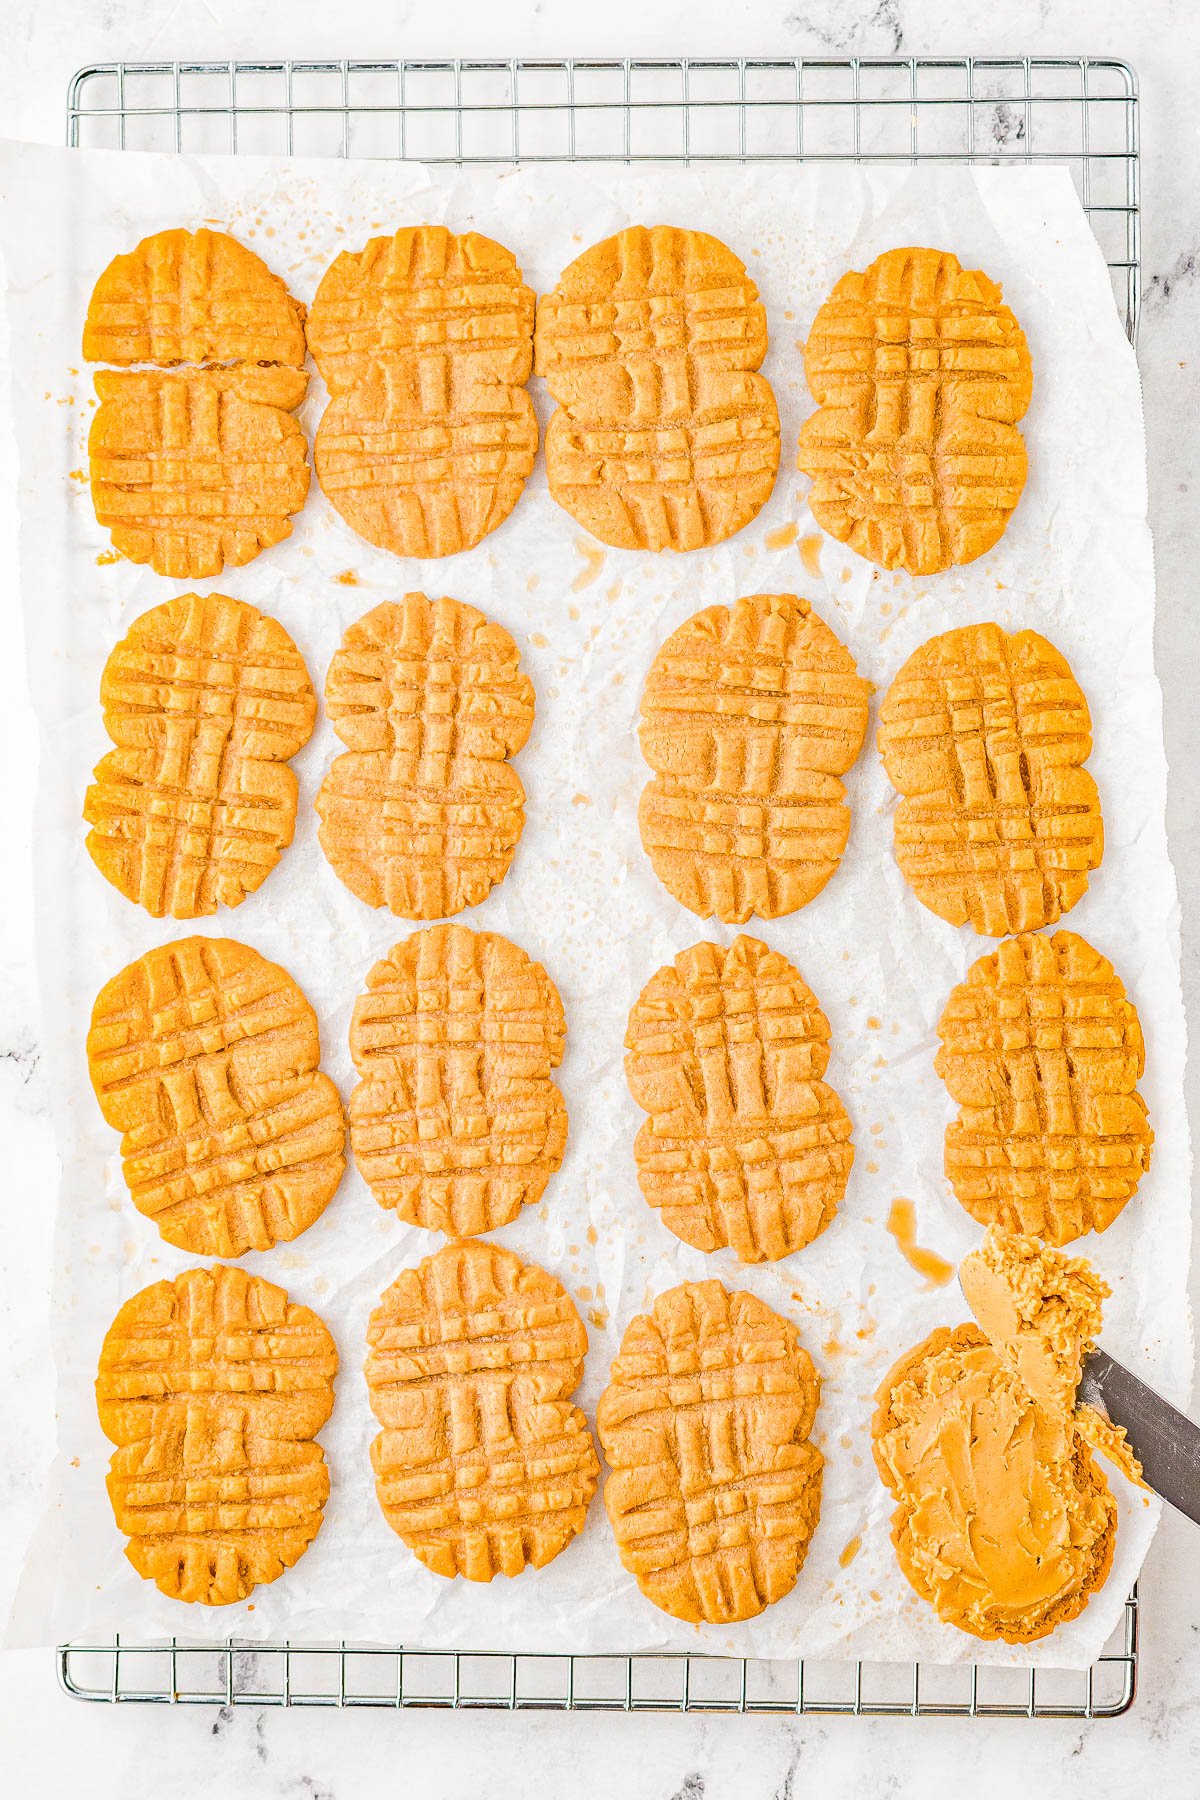 Homemade Nutter Butter Cookies - Homemade copycat Nutter Butters are so much better than the store bought originals! Creamy peanut butter filling is sandwiched between lightly crunchy peanut butter cookies. Pinches of optional sea salt and melted chocolate drizzled over the tops make these cookies simply THE BEST! 